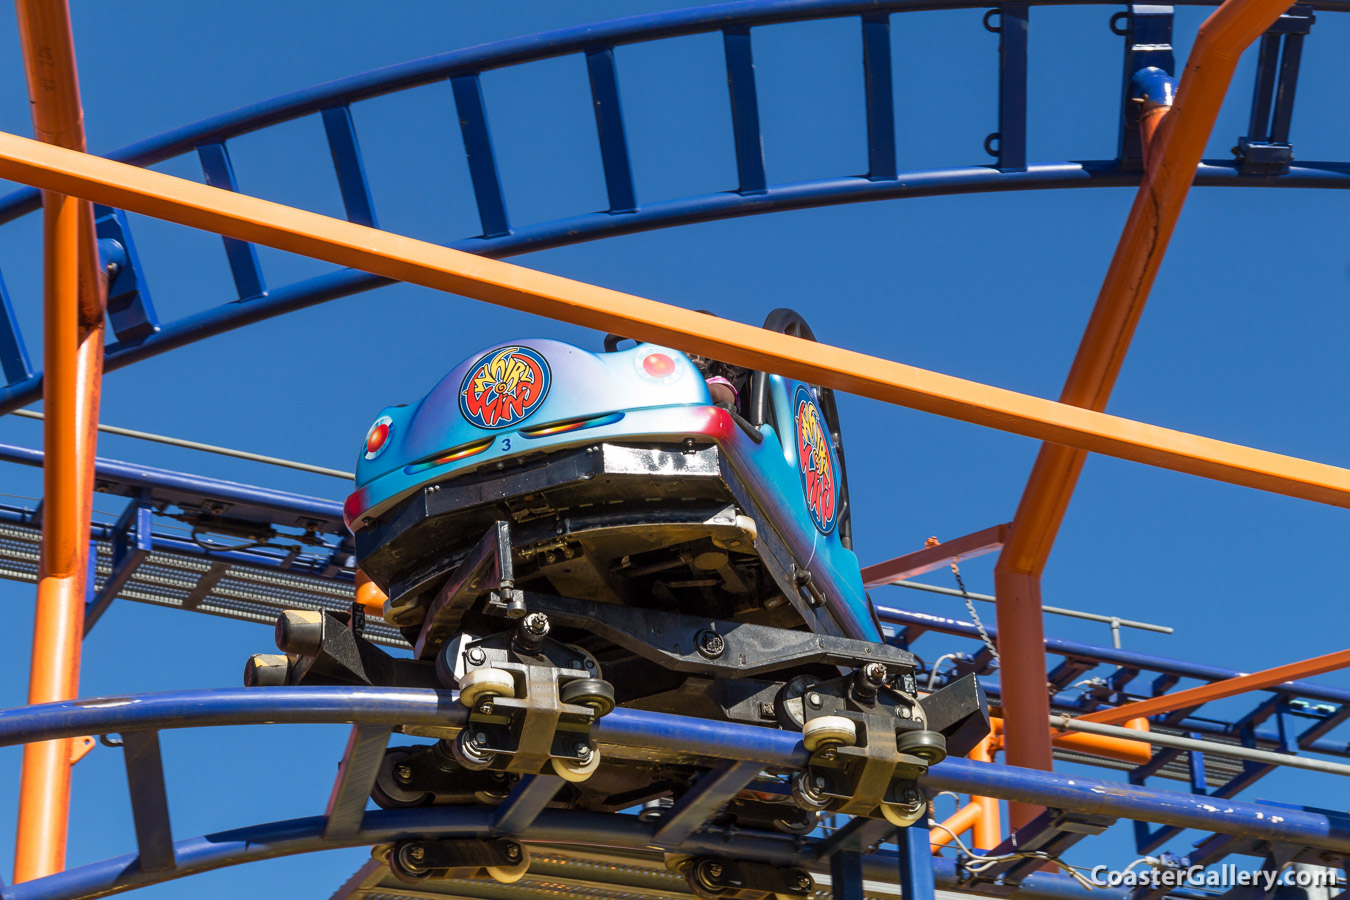 Pictures of the Xtended SC 2000 coaster at Seabreeze amusement park